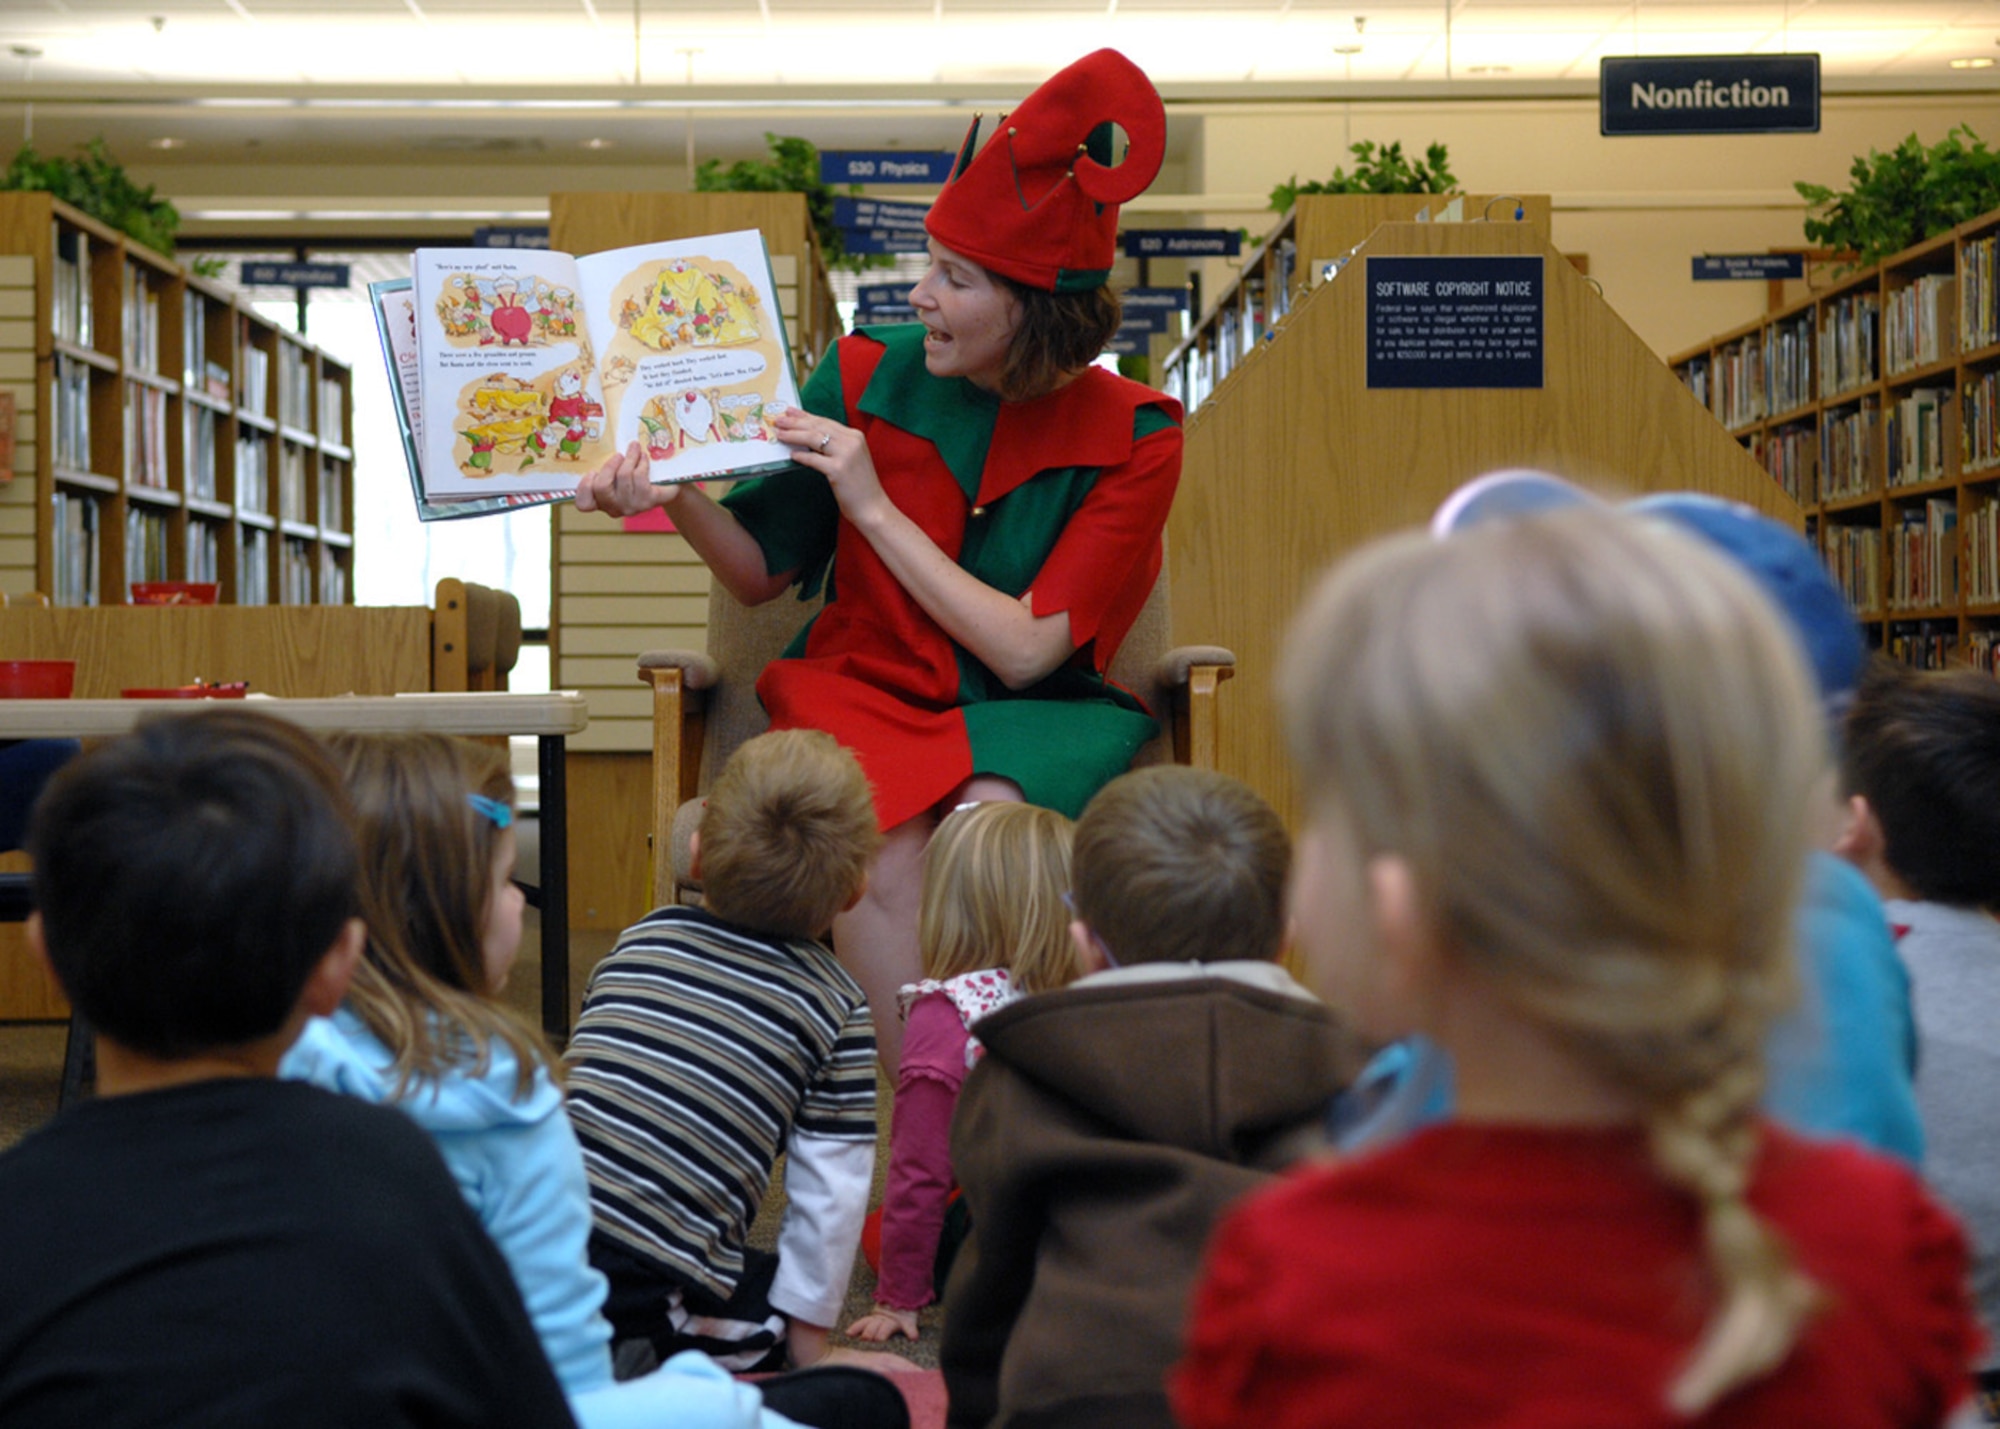 Janelle Hockman, dressed as Santa's helper, reads “Who'll Pull Santa's Sleigh Tonight” at Ahren's Memorial library at Holloman Air Force Base, N.M., Dec.17. Children read along as they patiently wait for Santa's arrival. (U.S. Air Force photo/Airman 1st Class Veronica Salgado)